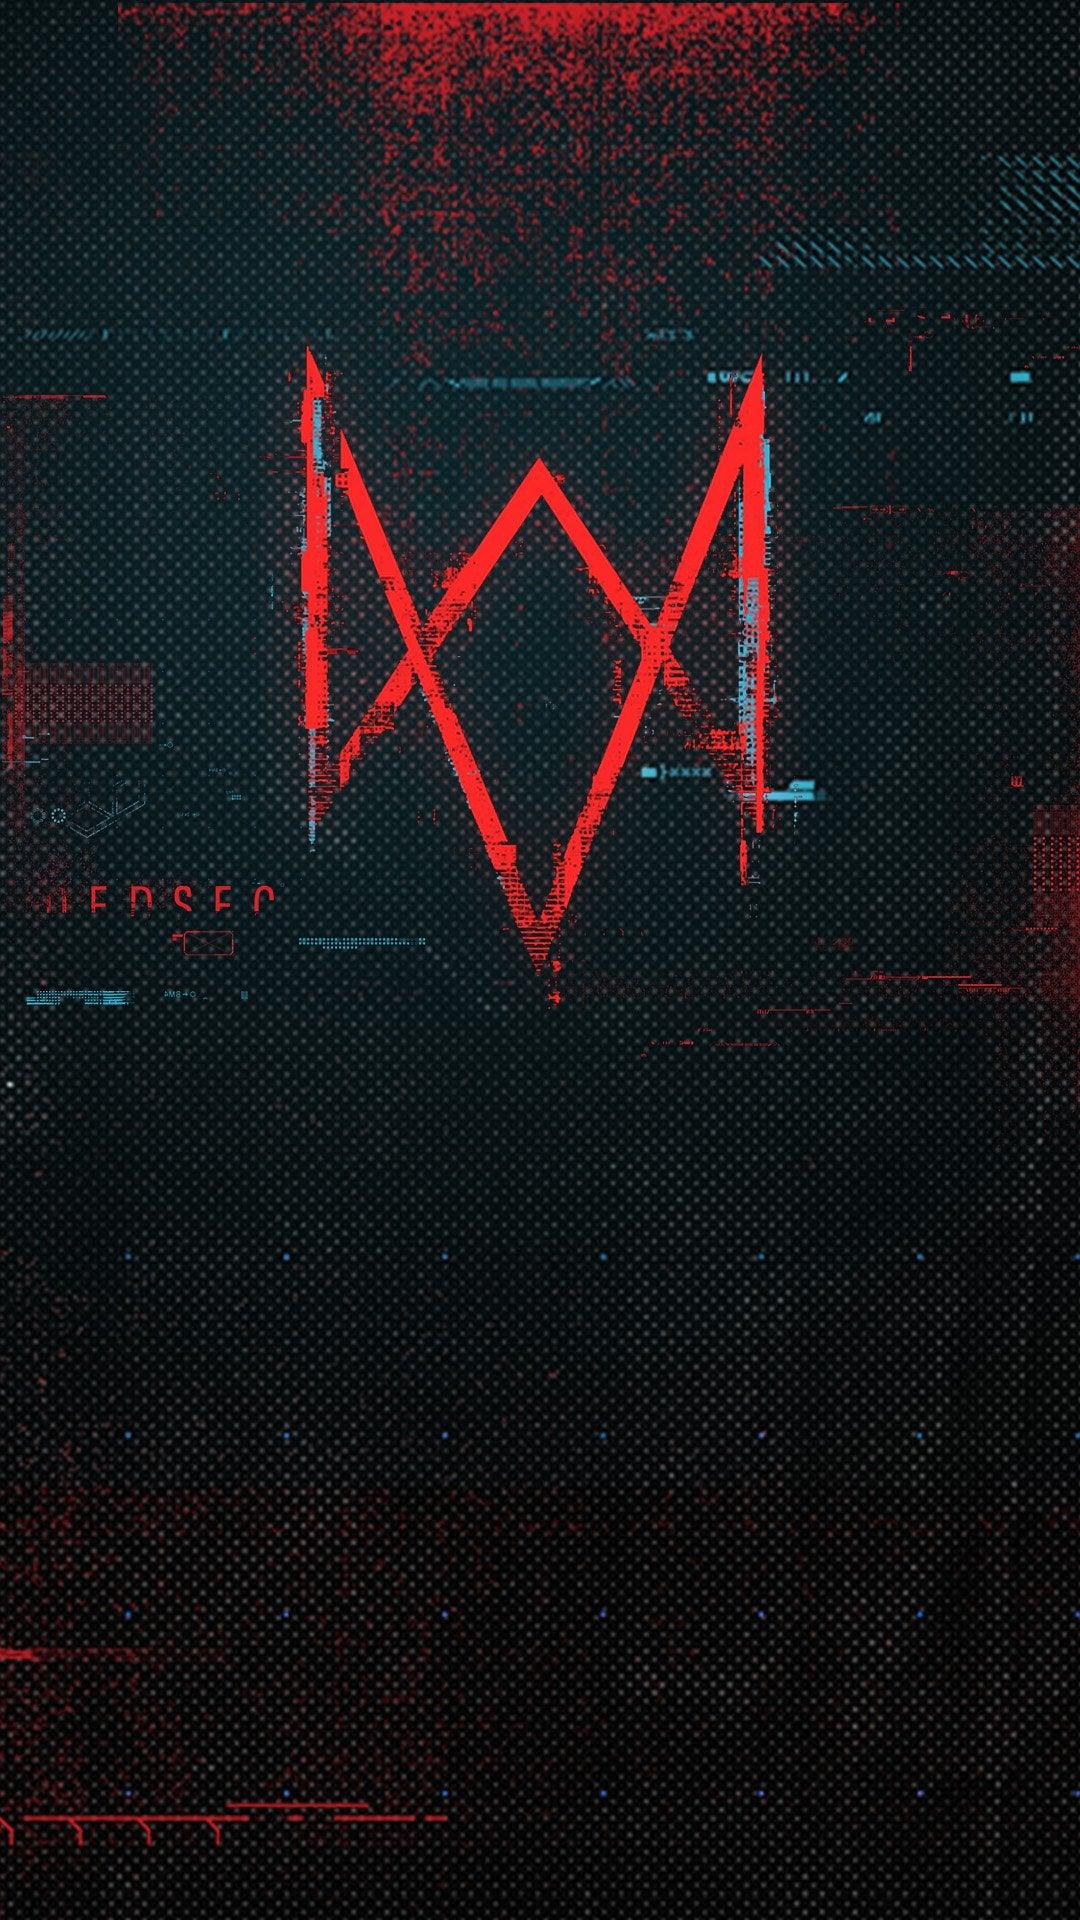 I made a phone wallpaper of the Watch Dogs Legion logo. Feel free